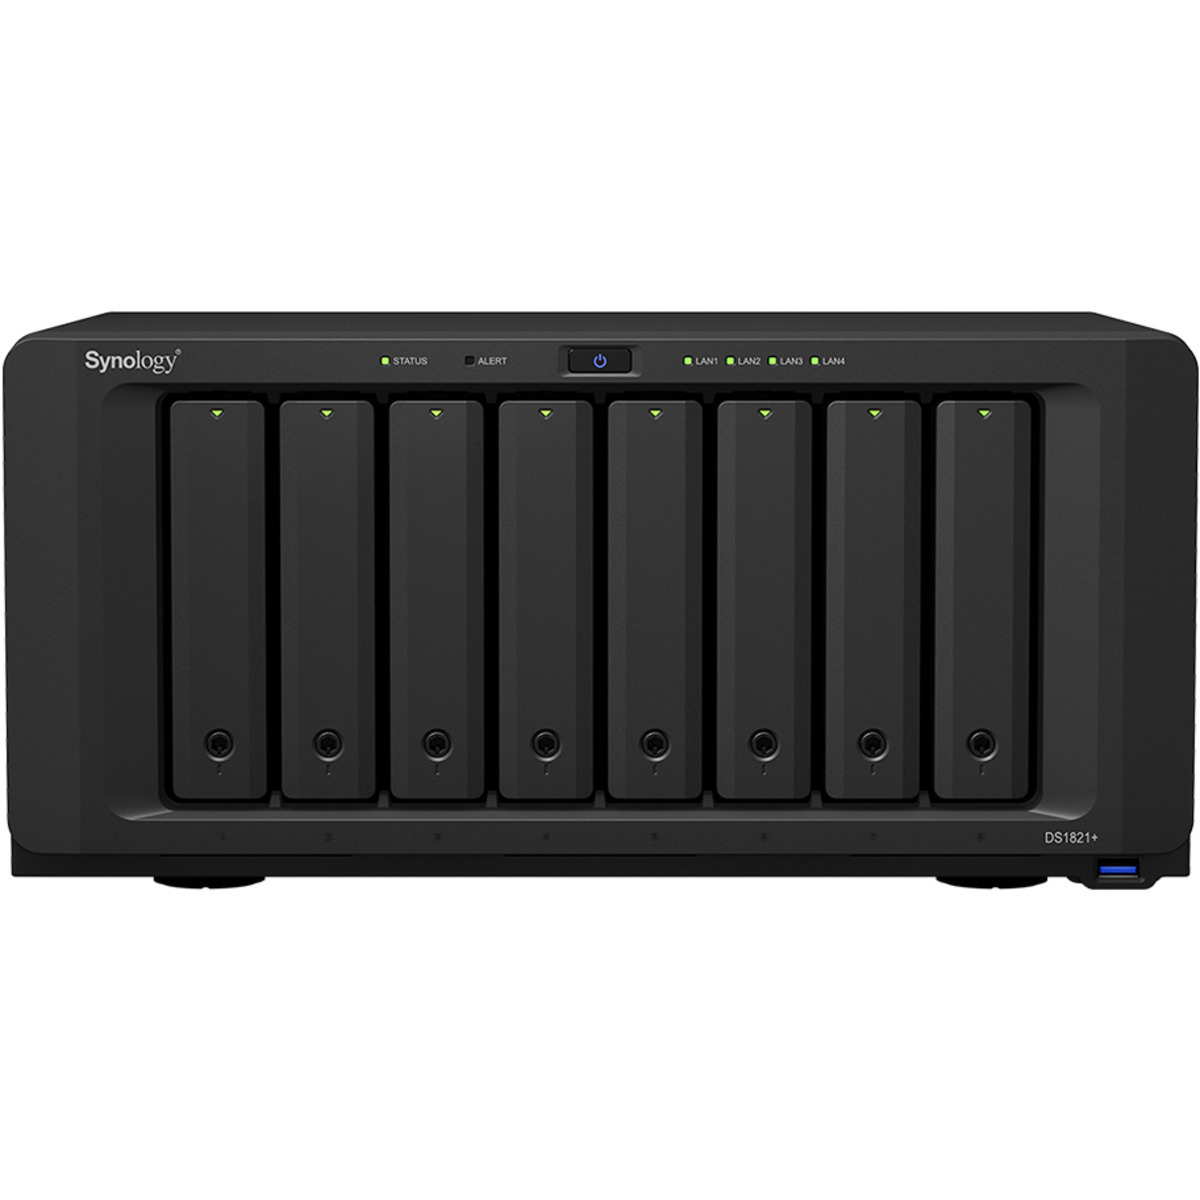 Synology DiskStation DS1821+ 96tb 8-Bay Desktop Multimedia / Power User / Business NAS - Network Attached Storage Device 8x12tb Seagate IronWolf Pro ST12000NT001 3.5 7200rpm SATA 6Gb/s HDD NAS Class Drives Installed - Burn-In Tested - ON SALE - FREE RAM UPGRADE DiskStation DS1821+